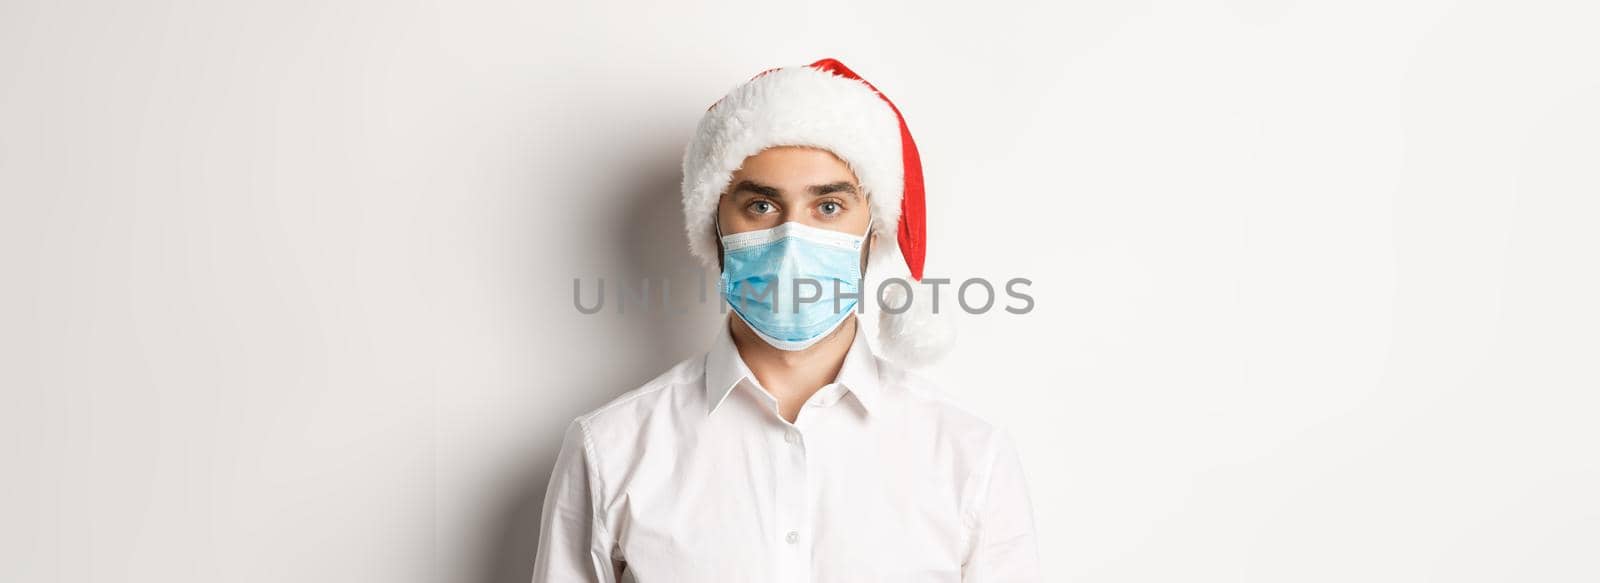 Concept of covid-19, social distancing and winter holidays. Close-up of young man wearing santa hat and face mask from coronavirus, celebrating New Year, white background.